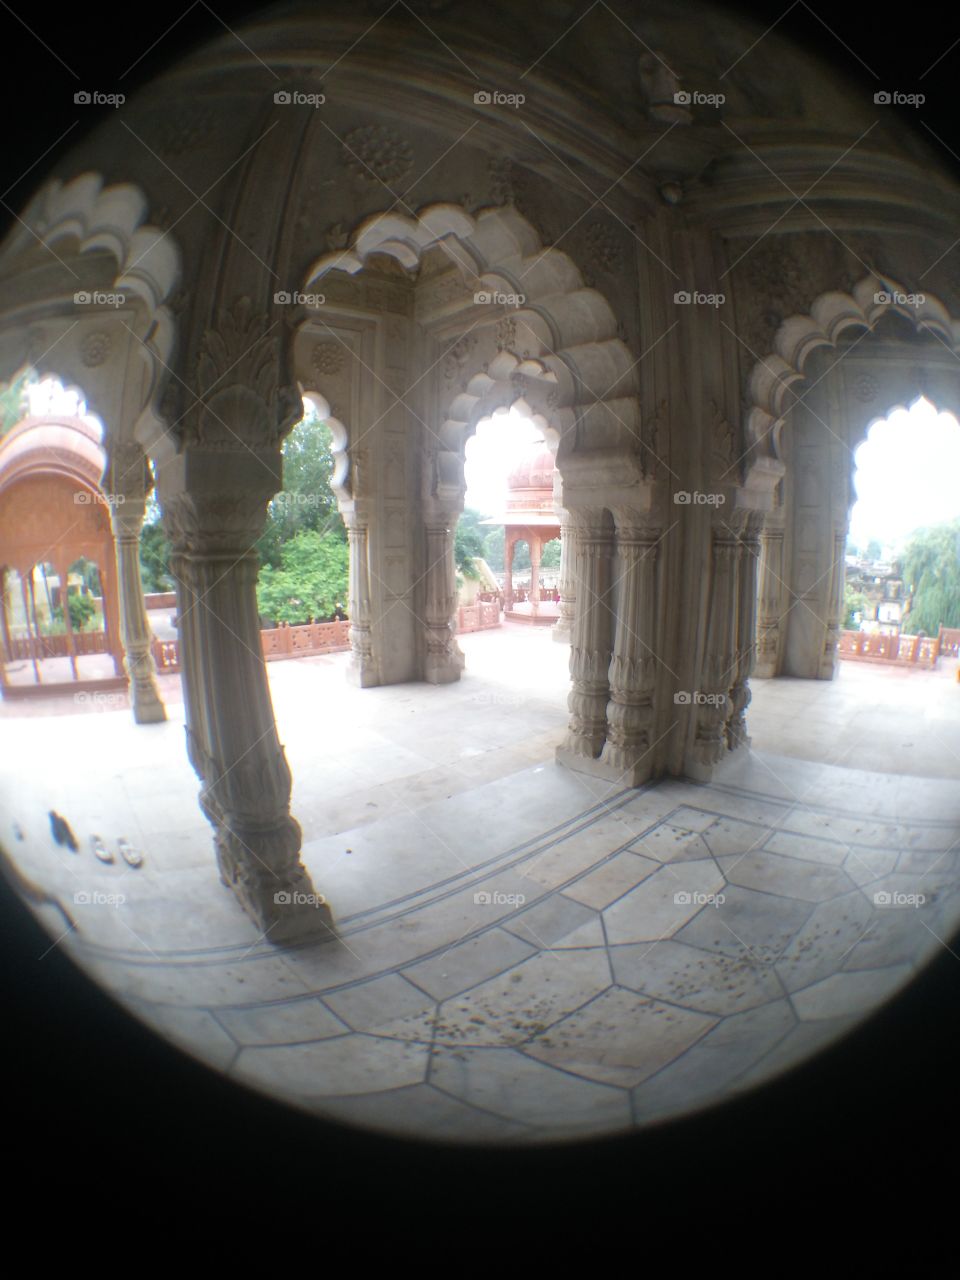 View of a beautiful arch